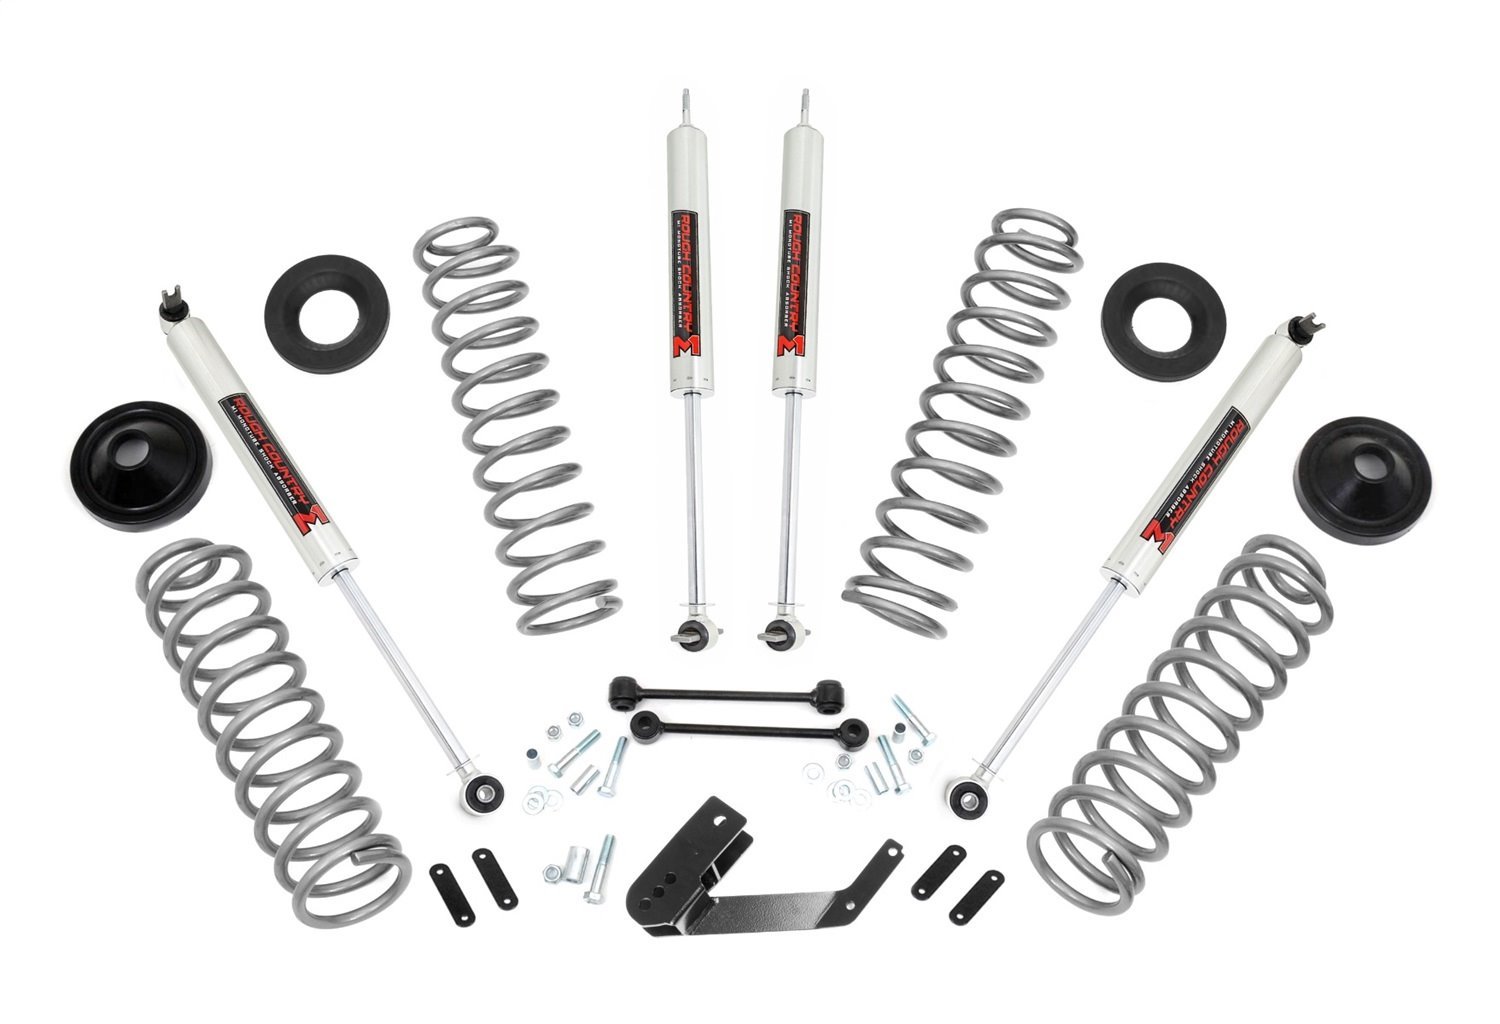 67640 Front and Rear Suspension Lift Kit, Lift Amount: 3.25 in. Front/3.25 in. Rear